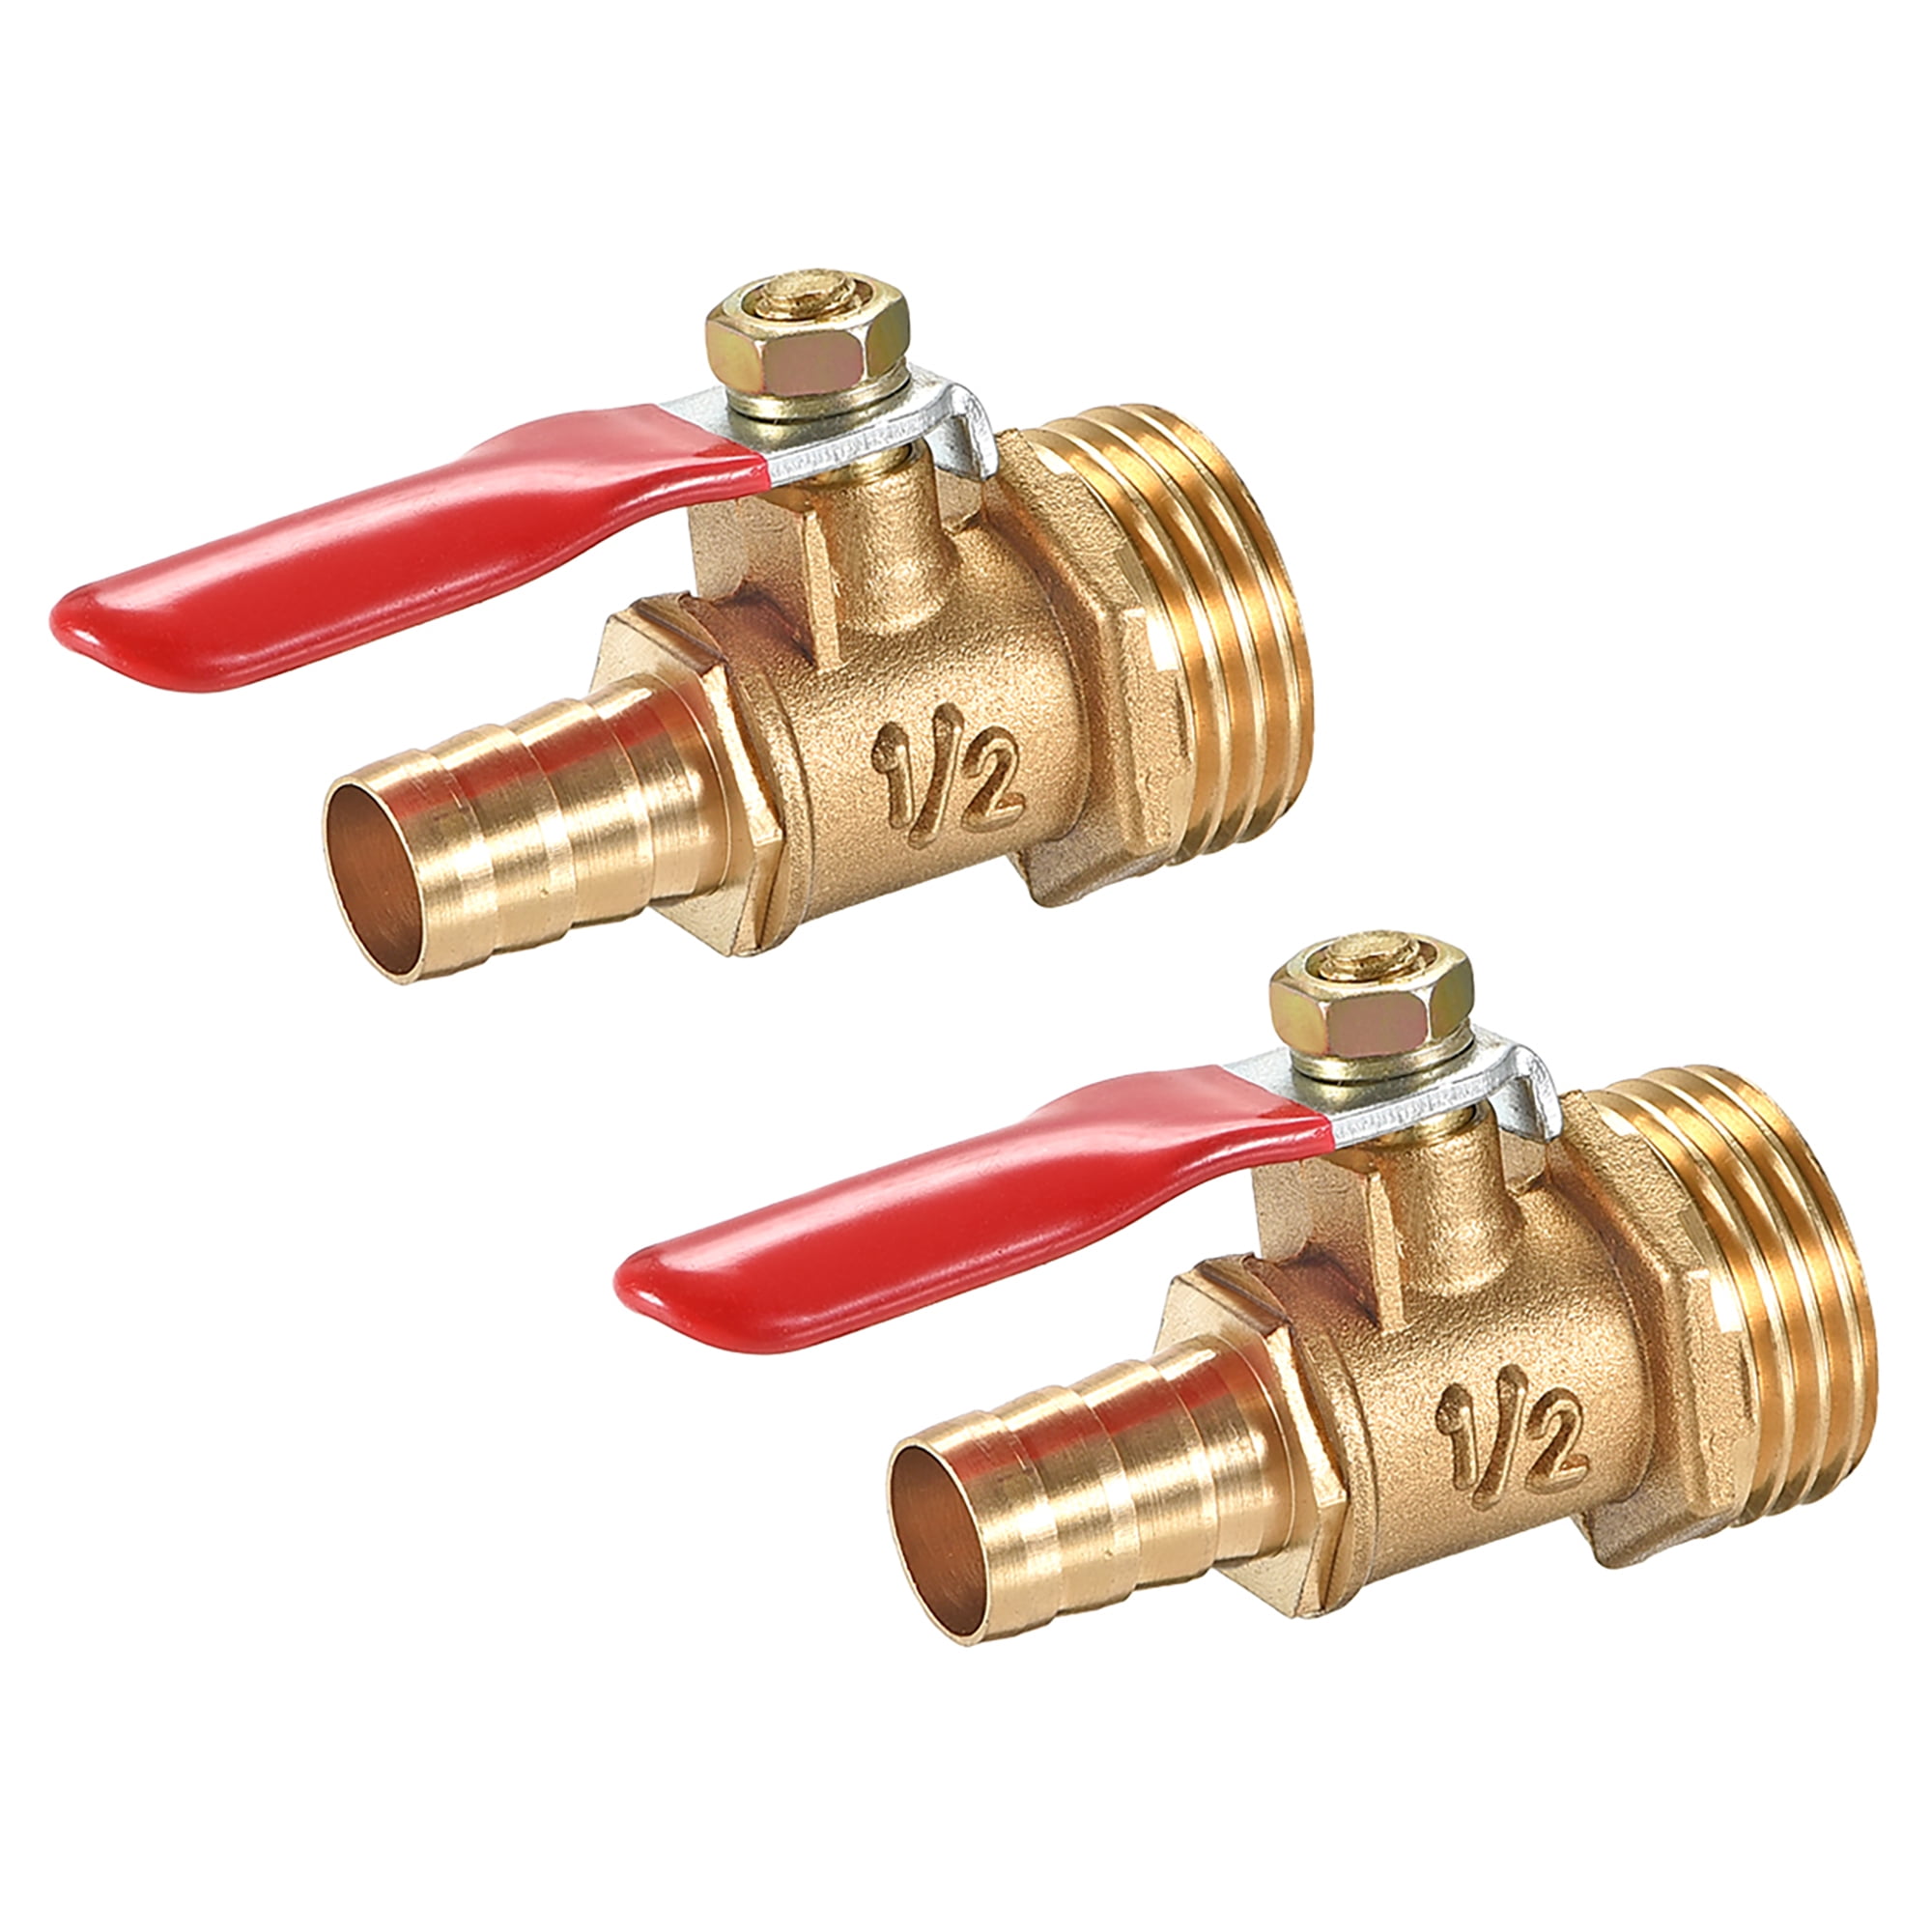 Brass Air Ball Valve Shut Off Switch G1/2 Male to Female Pipe Coupler 